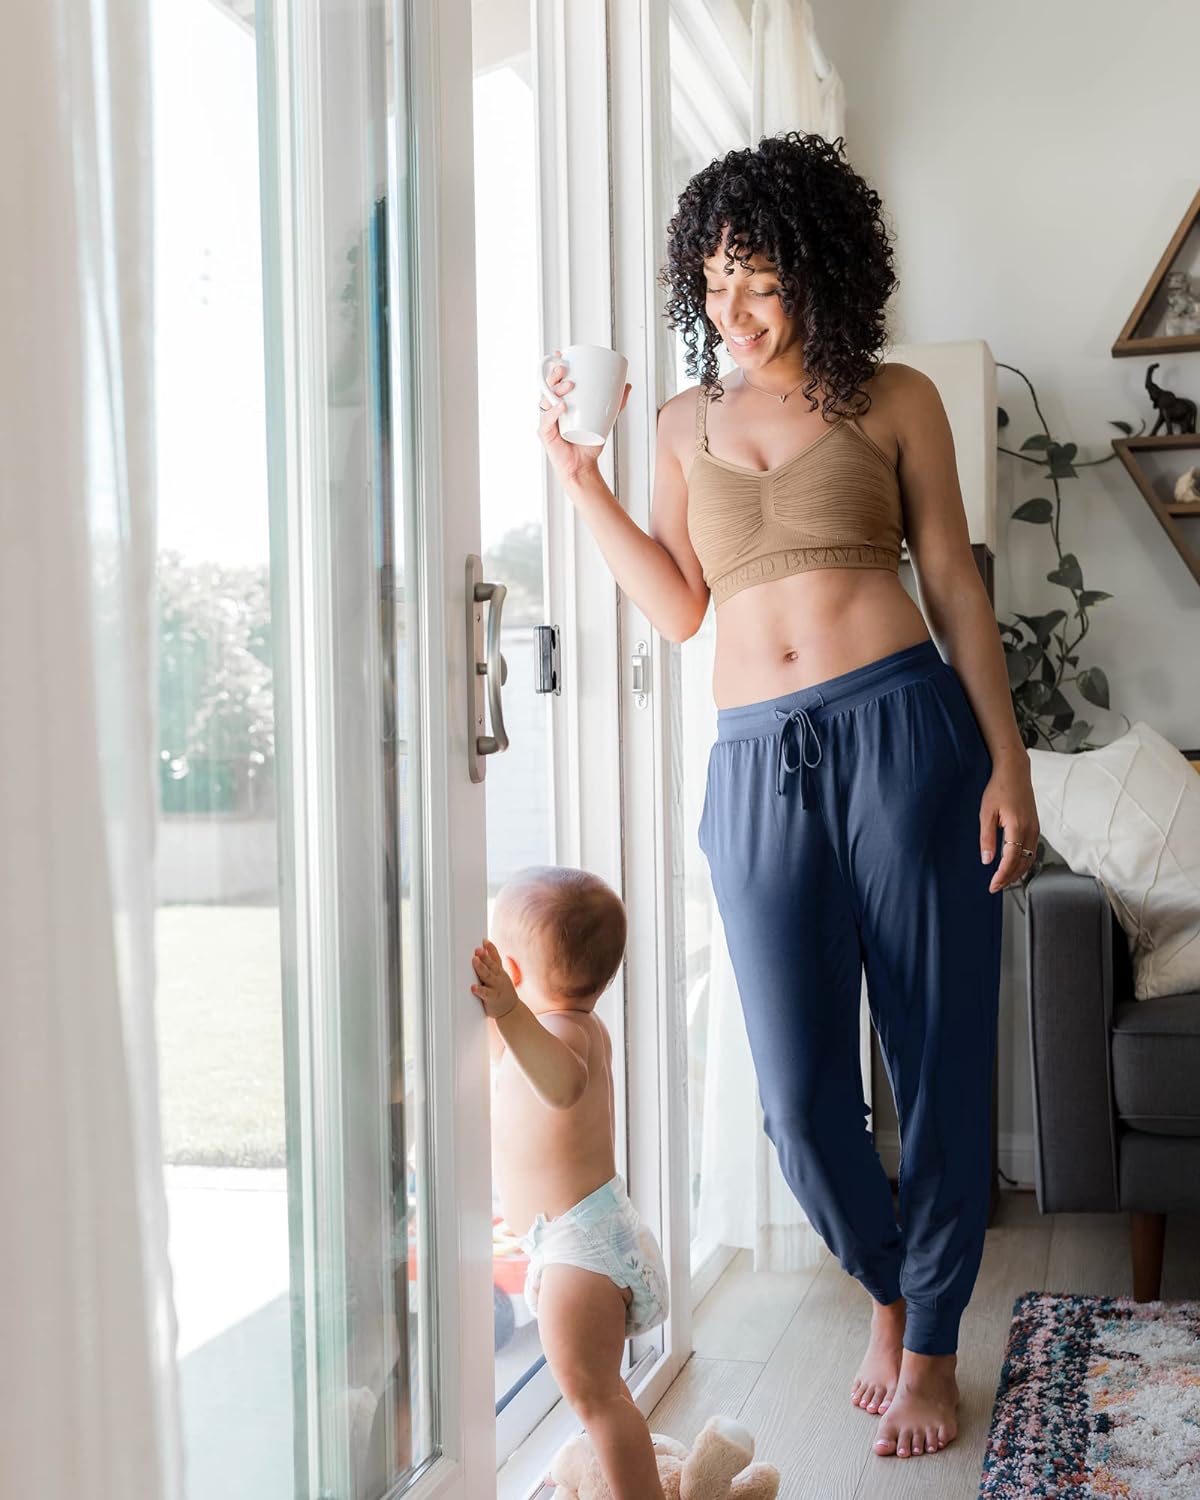 Kindred Bravely Everyday Maternity Joggers | Lounge Pants for Women